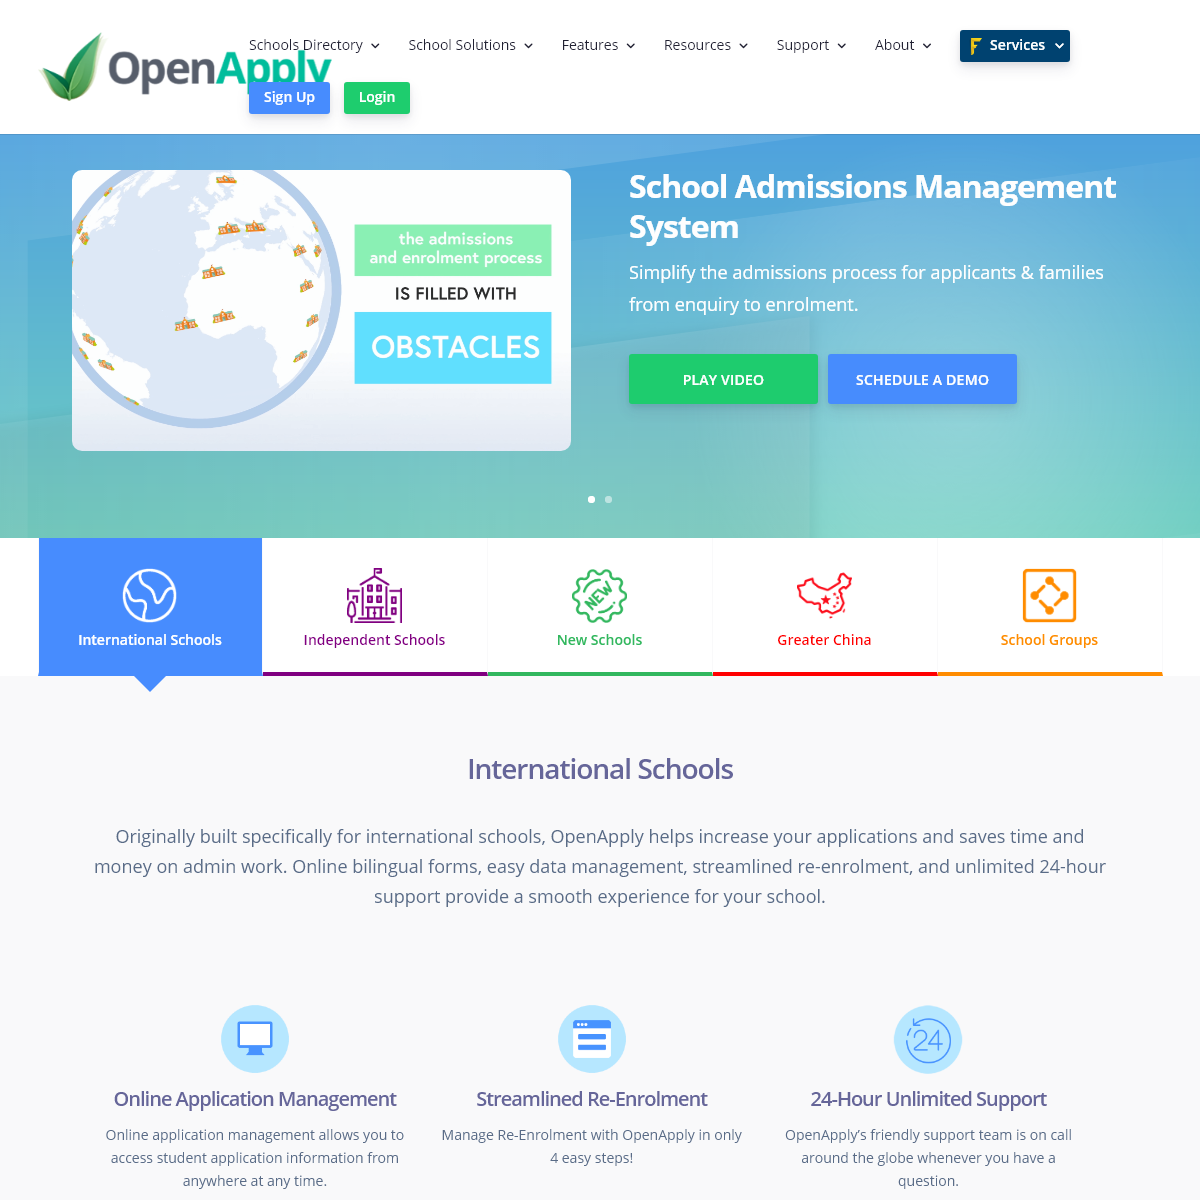 A complete backup of openapply.com